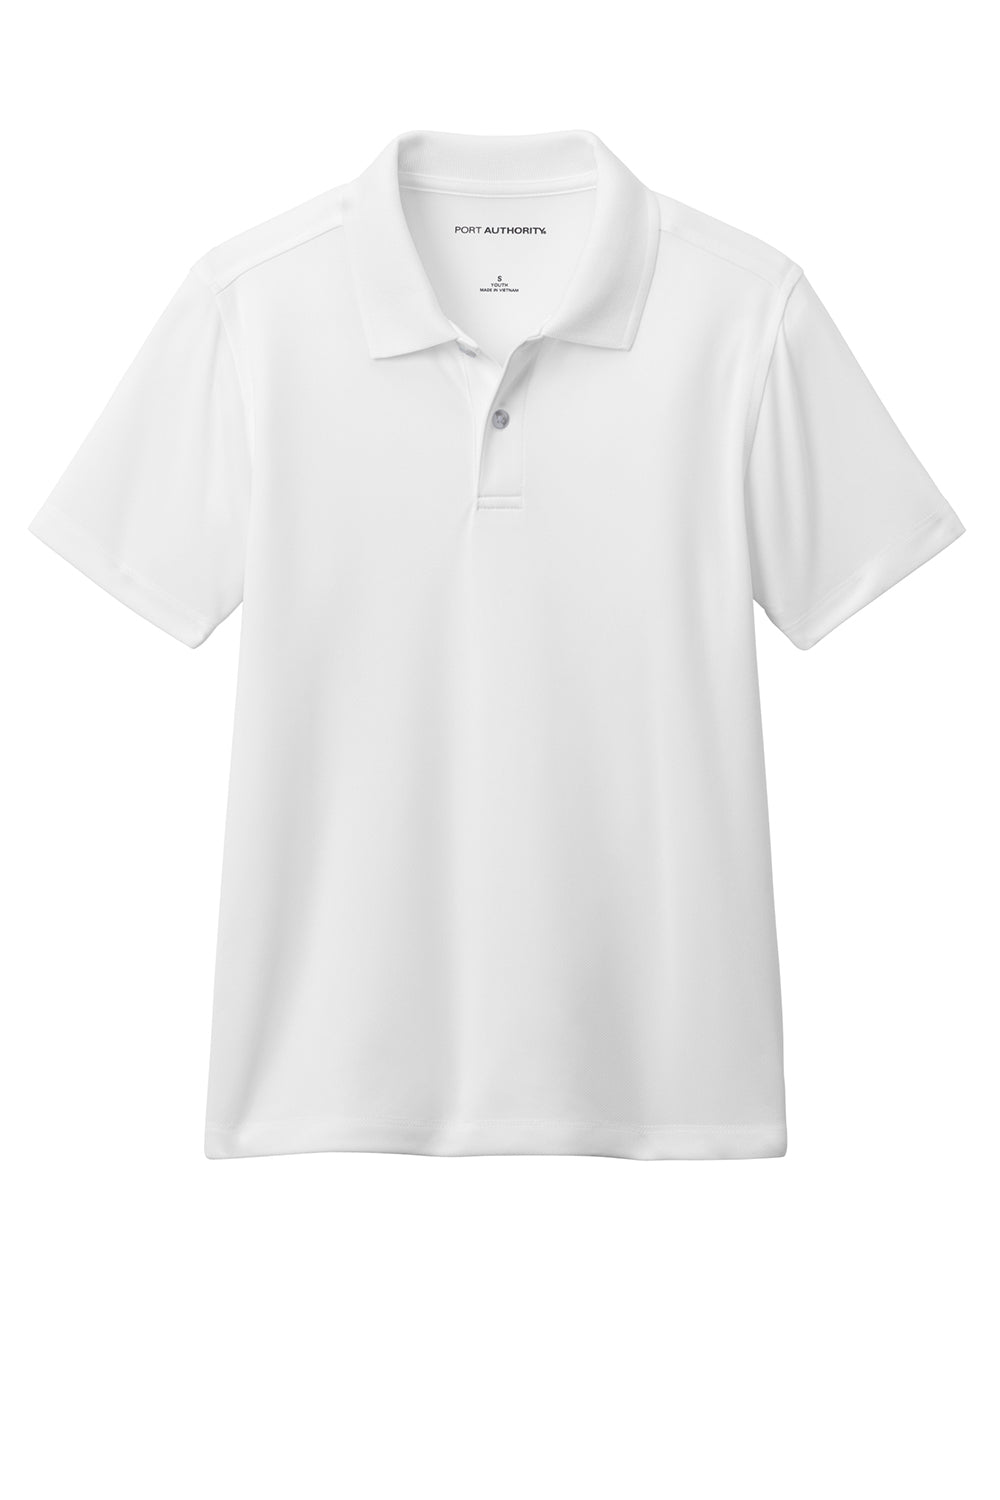 Port Authority Y110 Youth Dry Zone Moisture Wicking Short Sleeve Polo Shirt White Flat Front